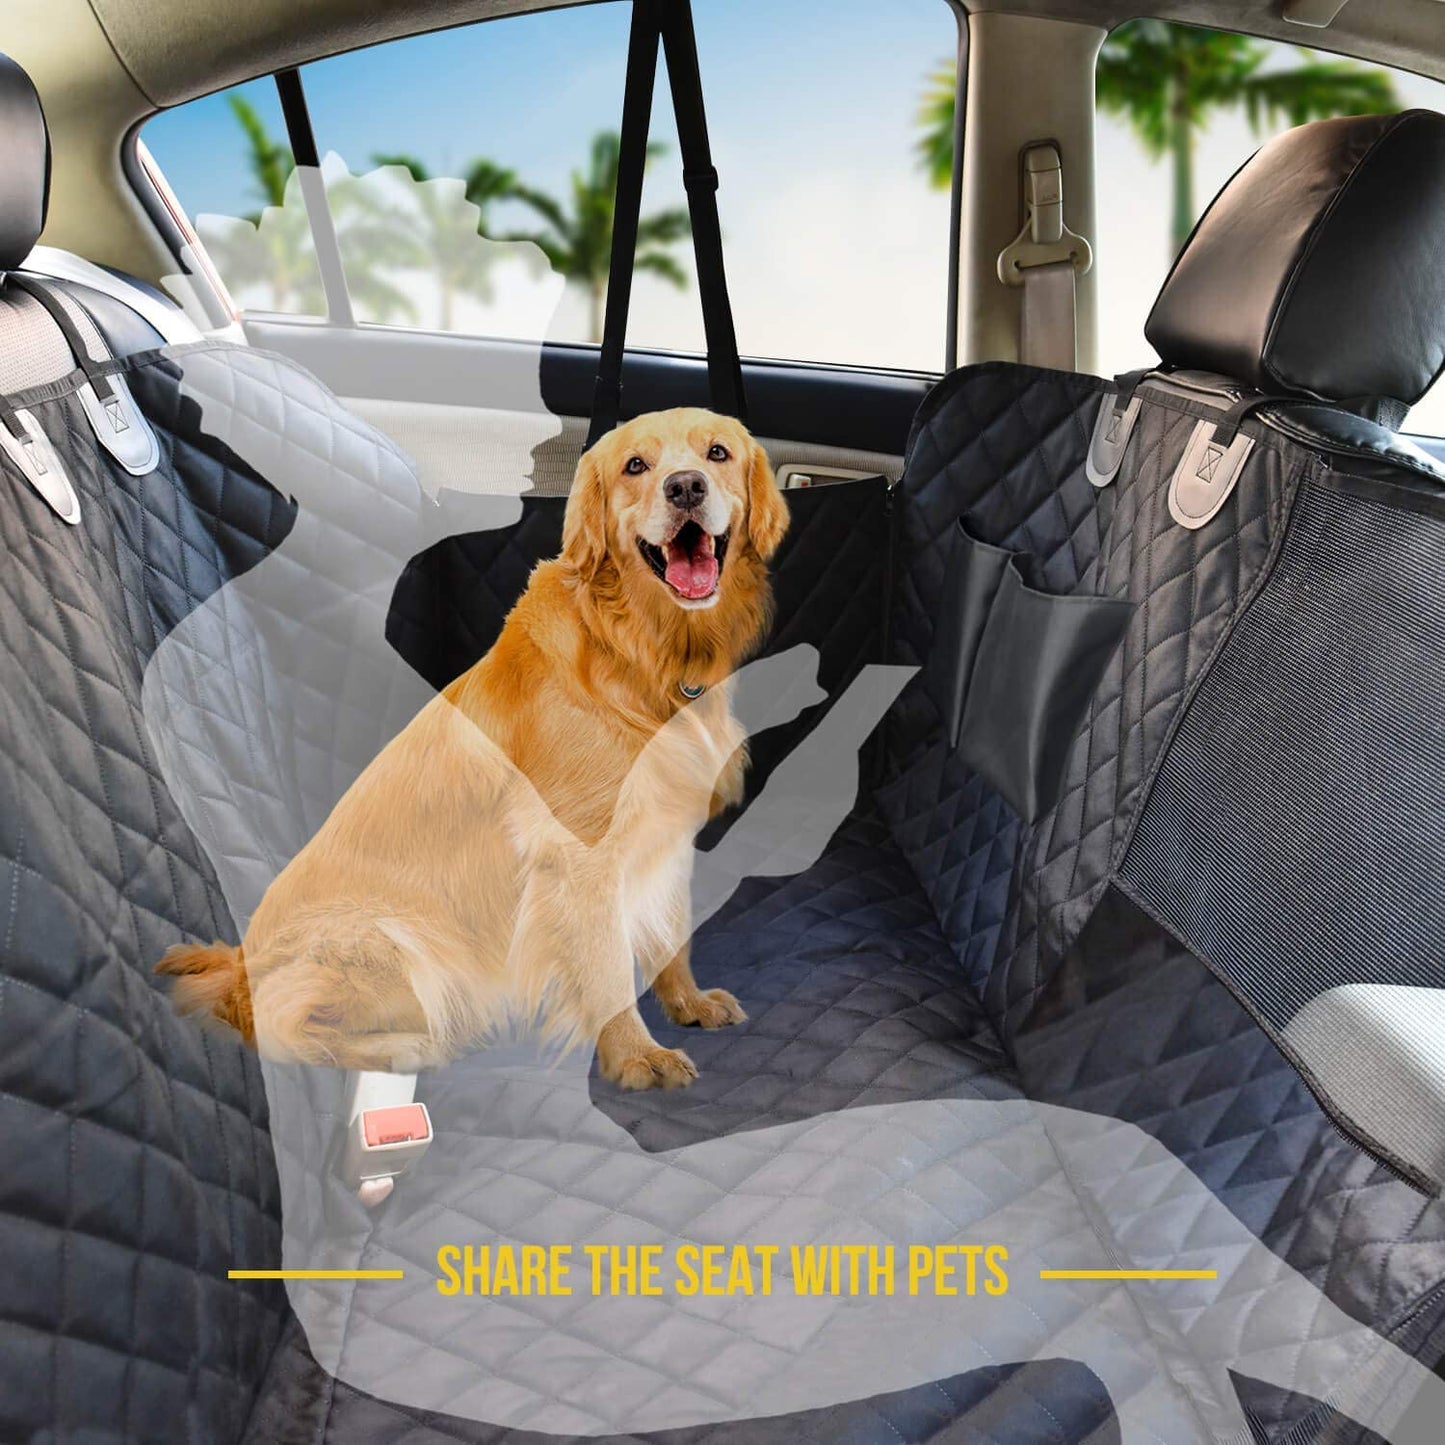 Dog Seat Cover for Back Seat, 100% Waterproof Dog Car Seat Covers with Mesh Window, Scratch Prevent Antinslip Dog Car Hammock, Car Seat Covers for Dogs, Dog Backseat Cover for Cars,Standard